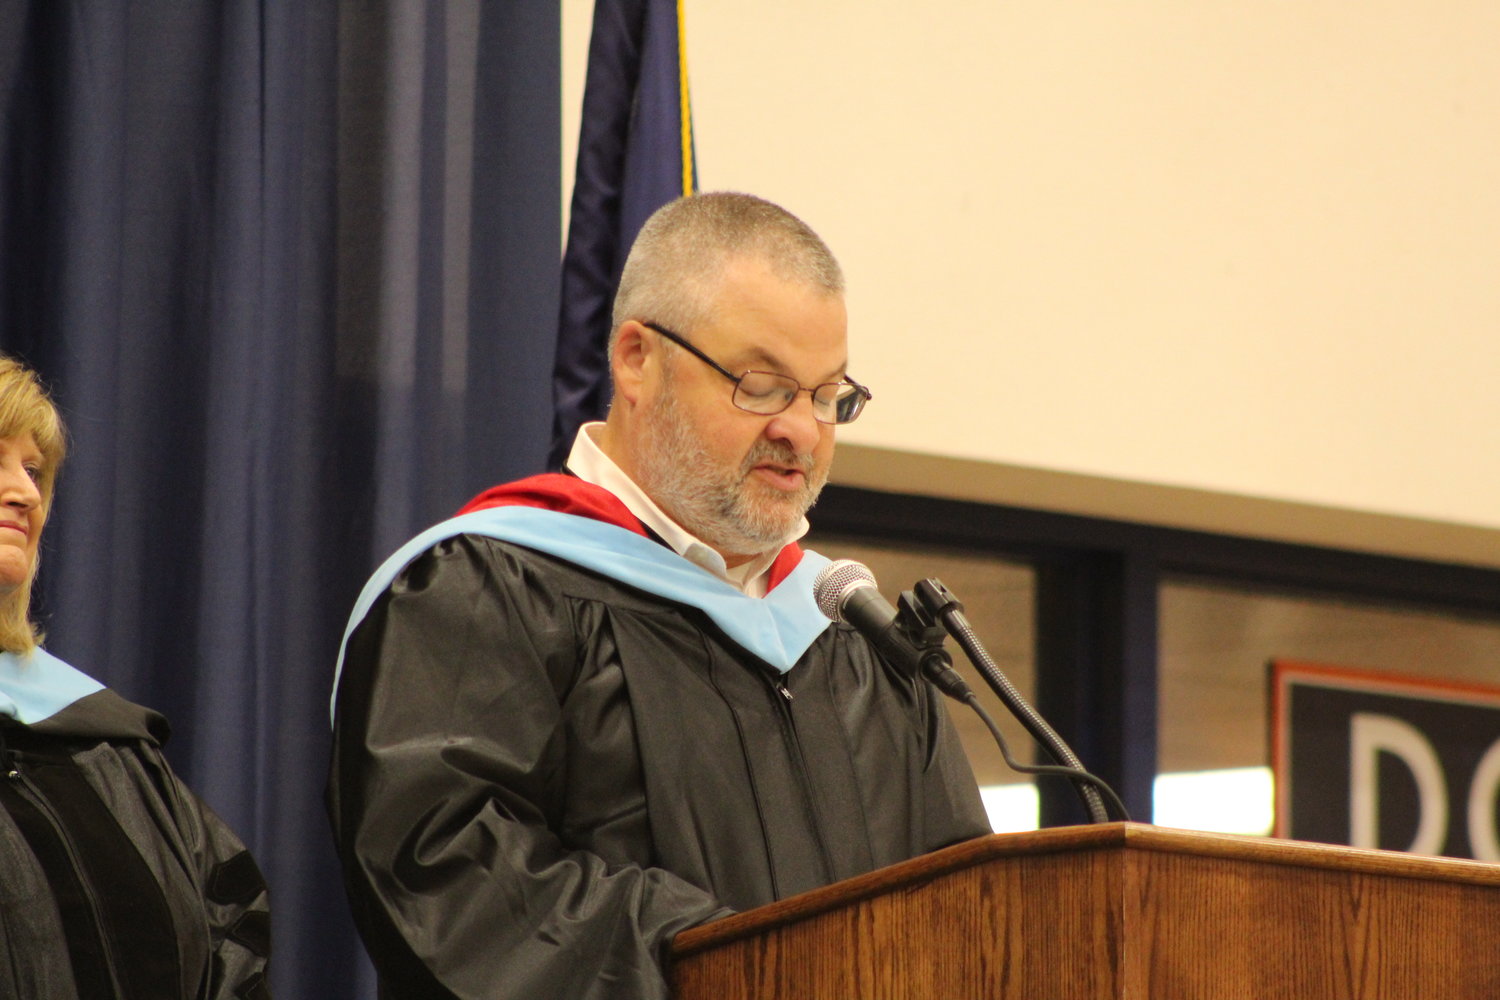 Outgoing North Montgomery Principal Michael Cox gives one final address to the graduating class of 2022.